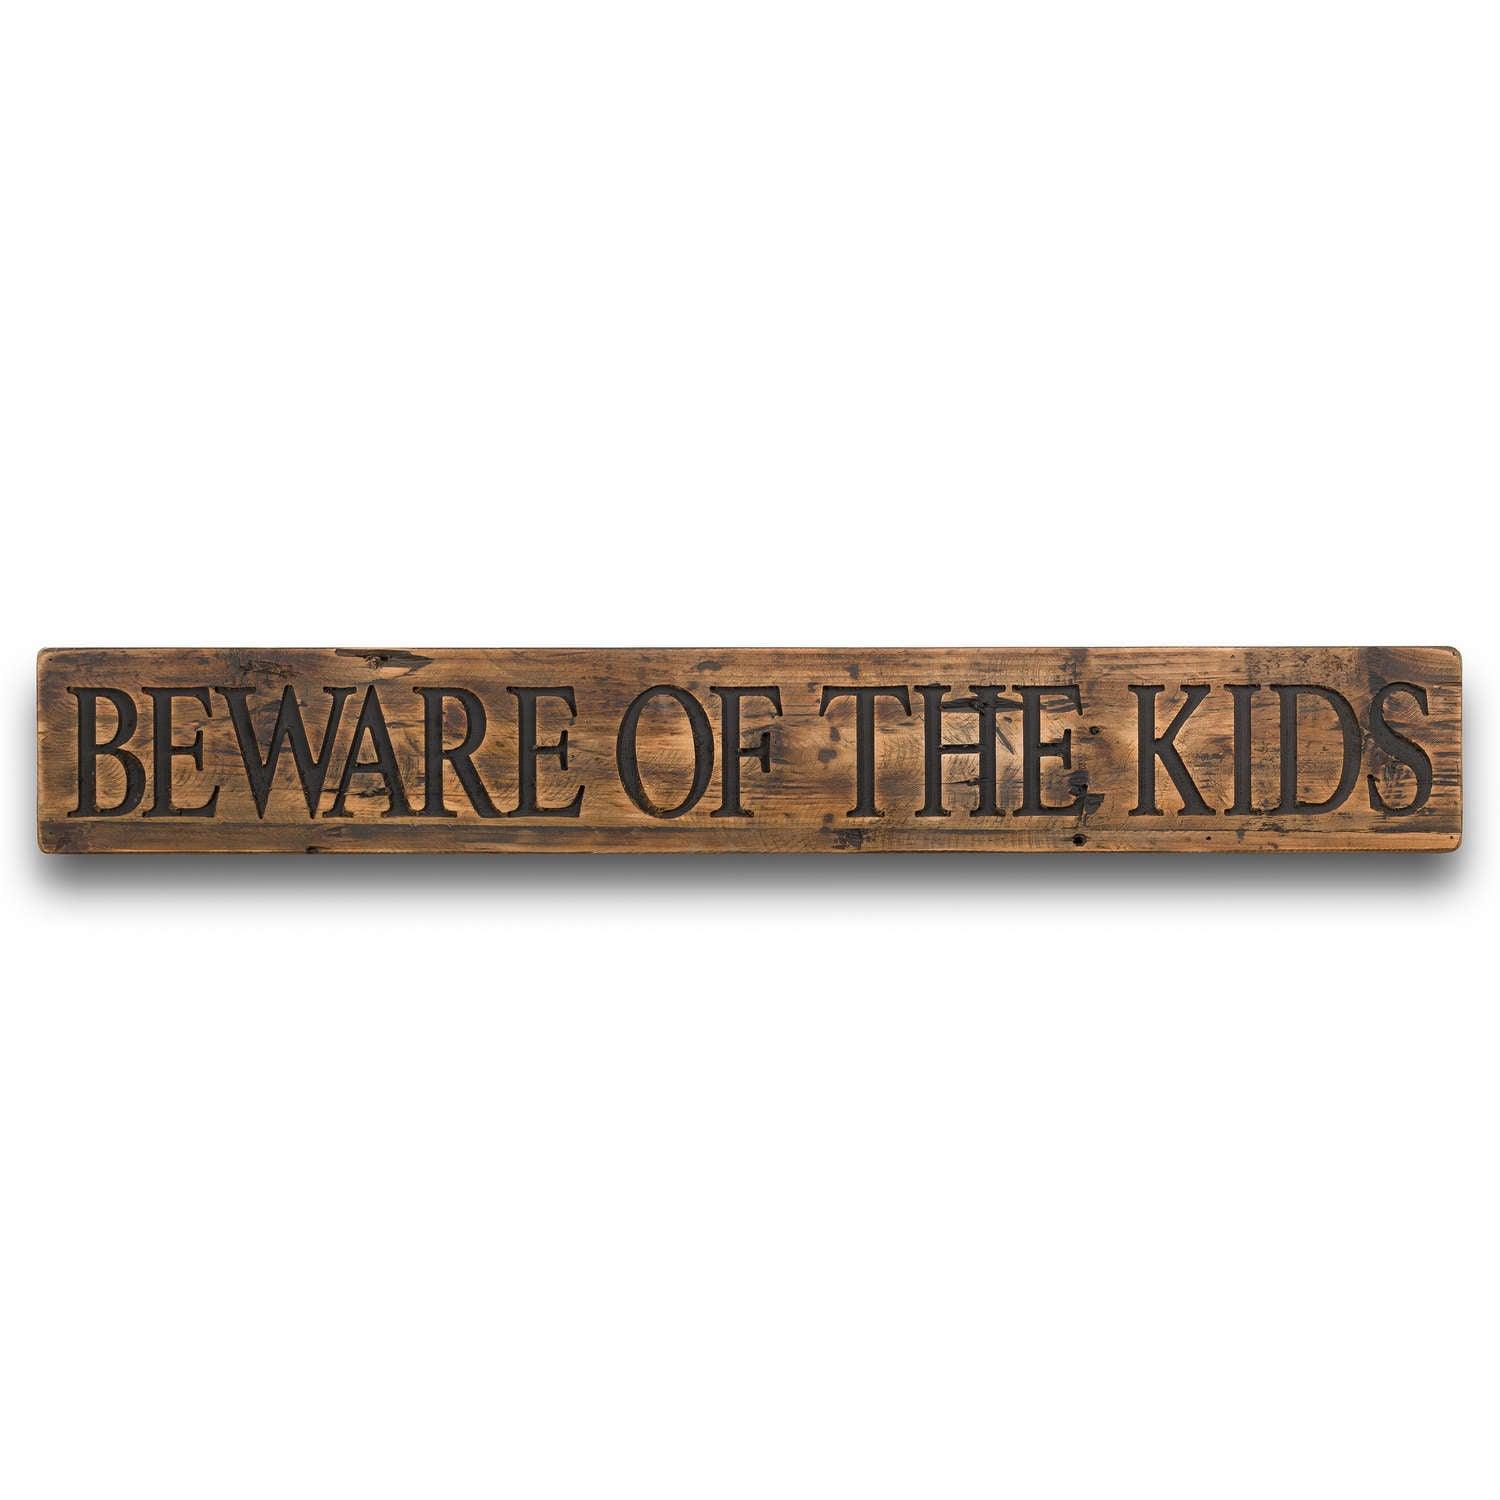 View Beware Of The Kids Rustic Wooden Message Plaque information